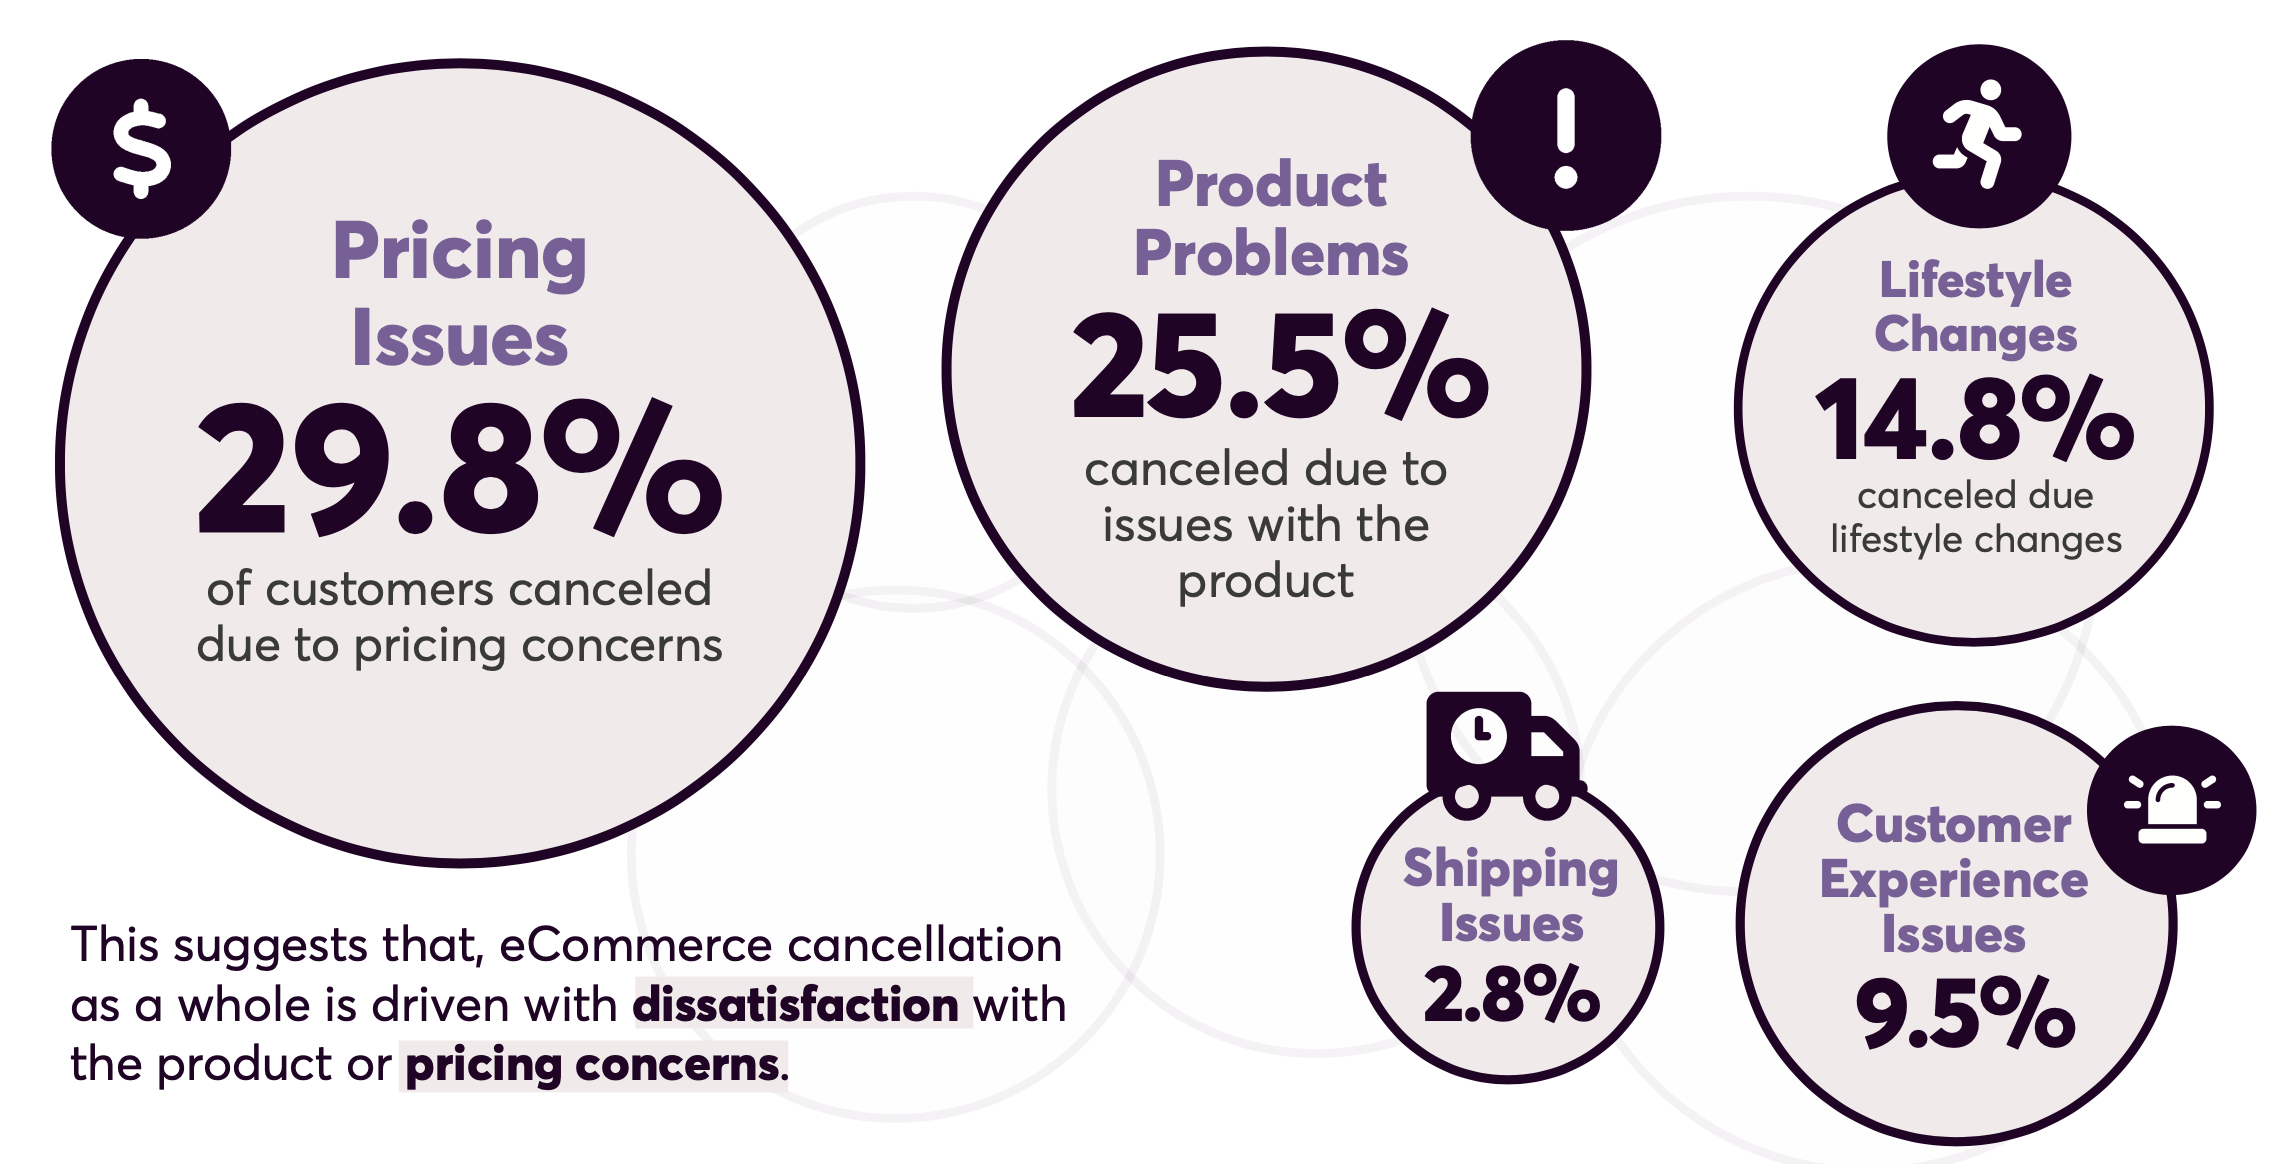 Top Cancel Reasons for eCommerce